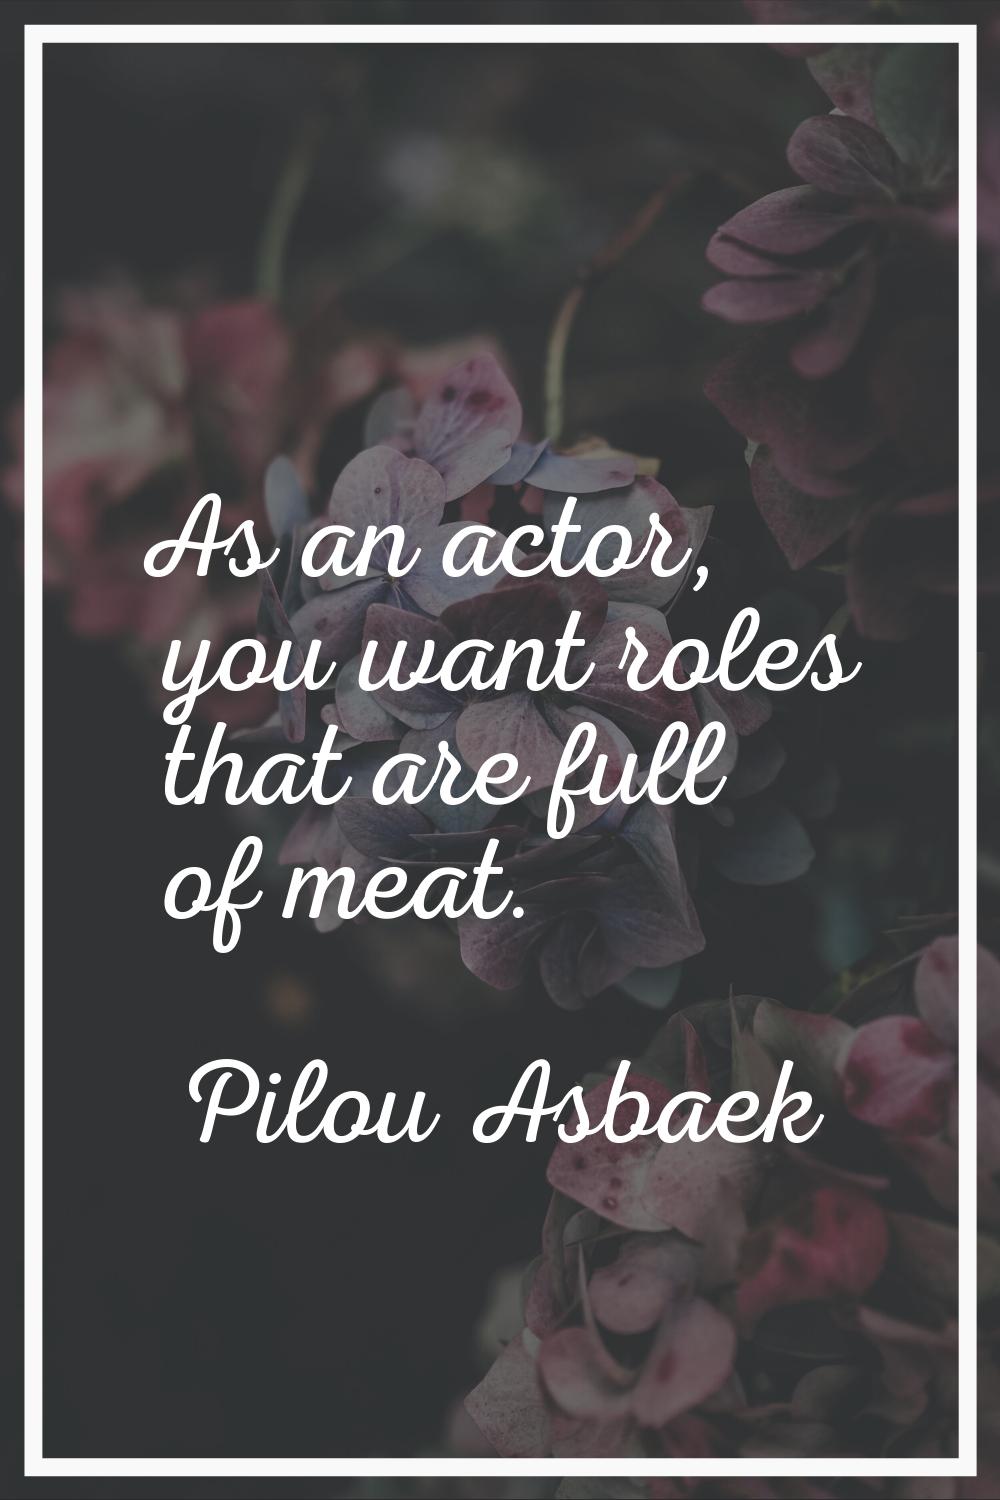 As an actor, you want roles that are full of meat.